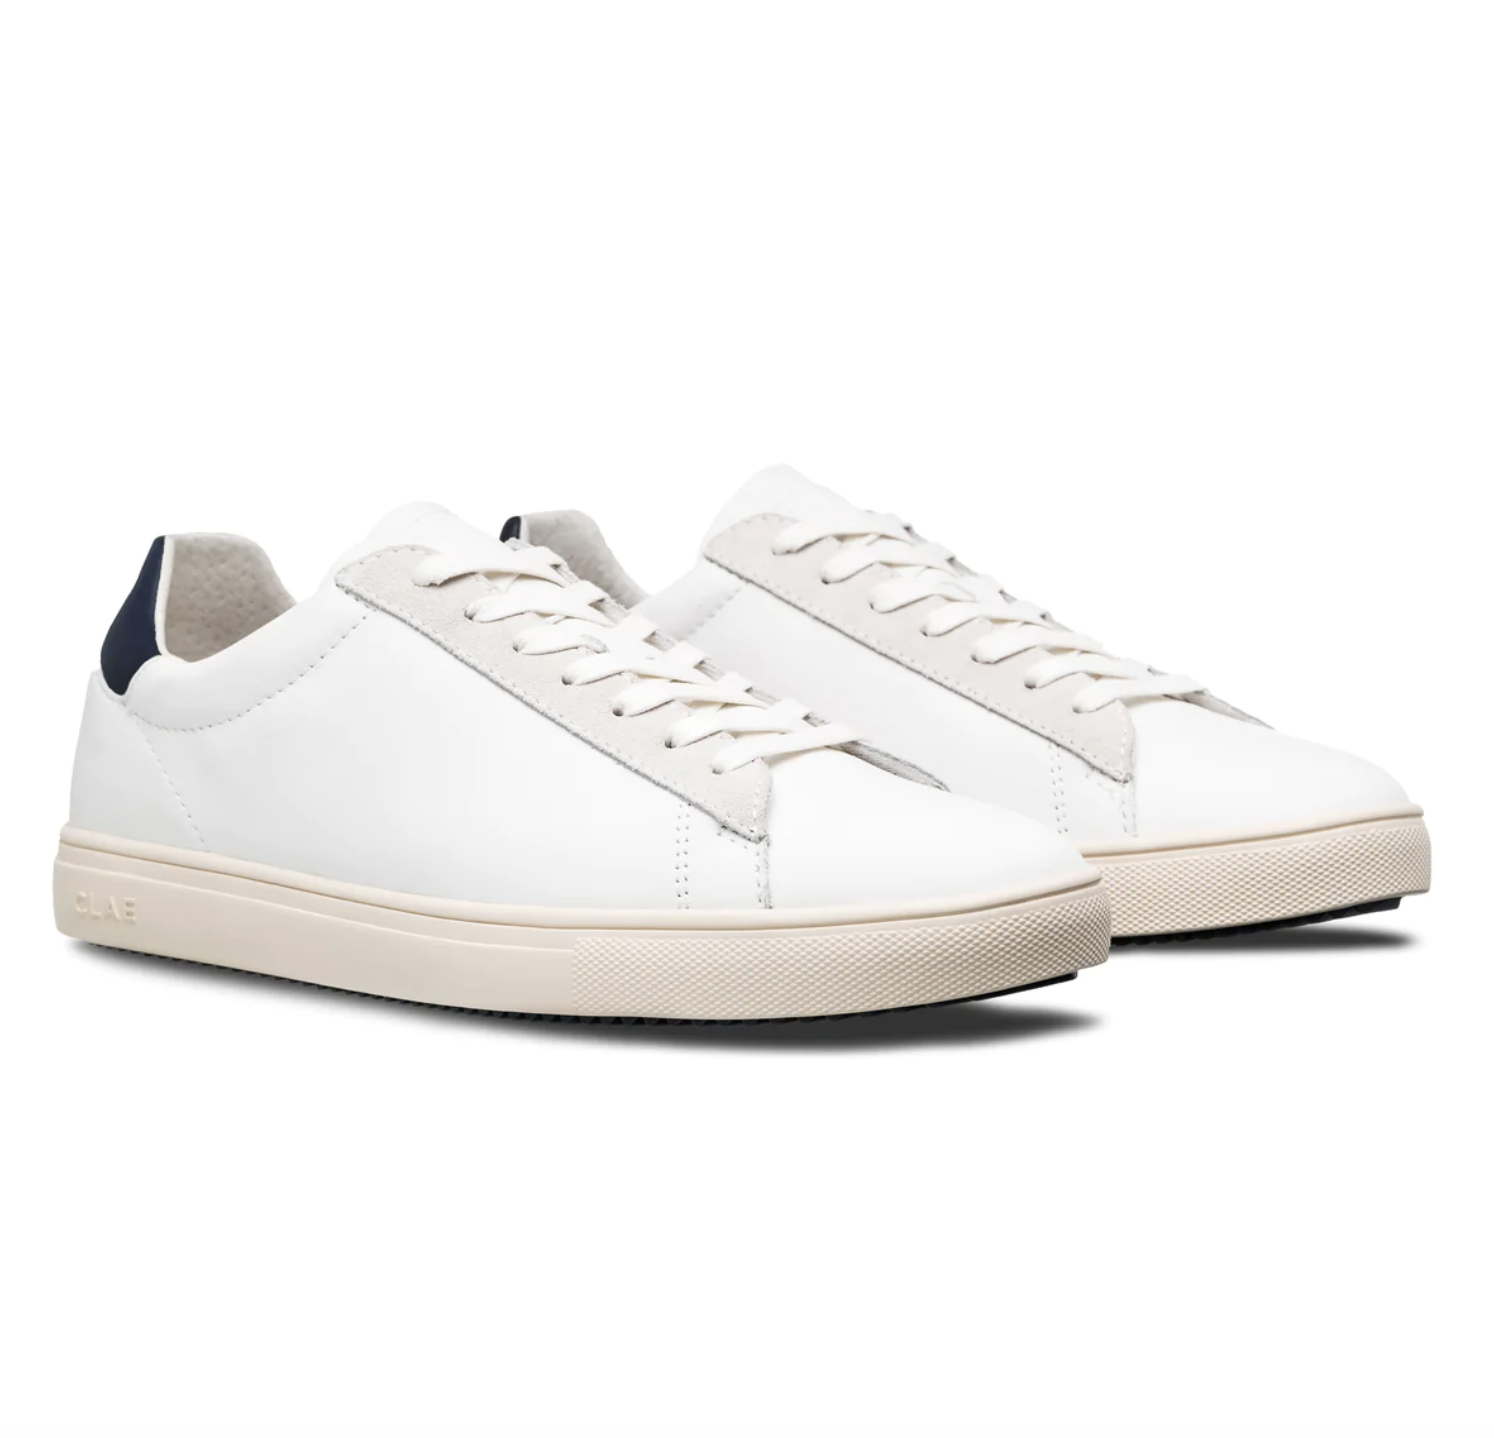 Clae Bradley California Trainers - White Leather Navy